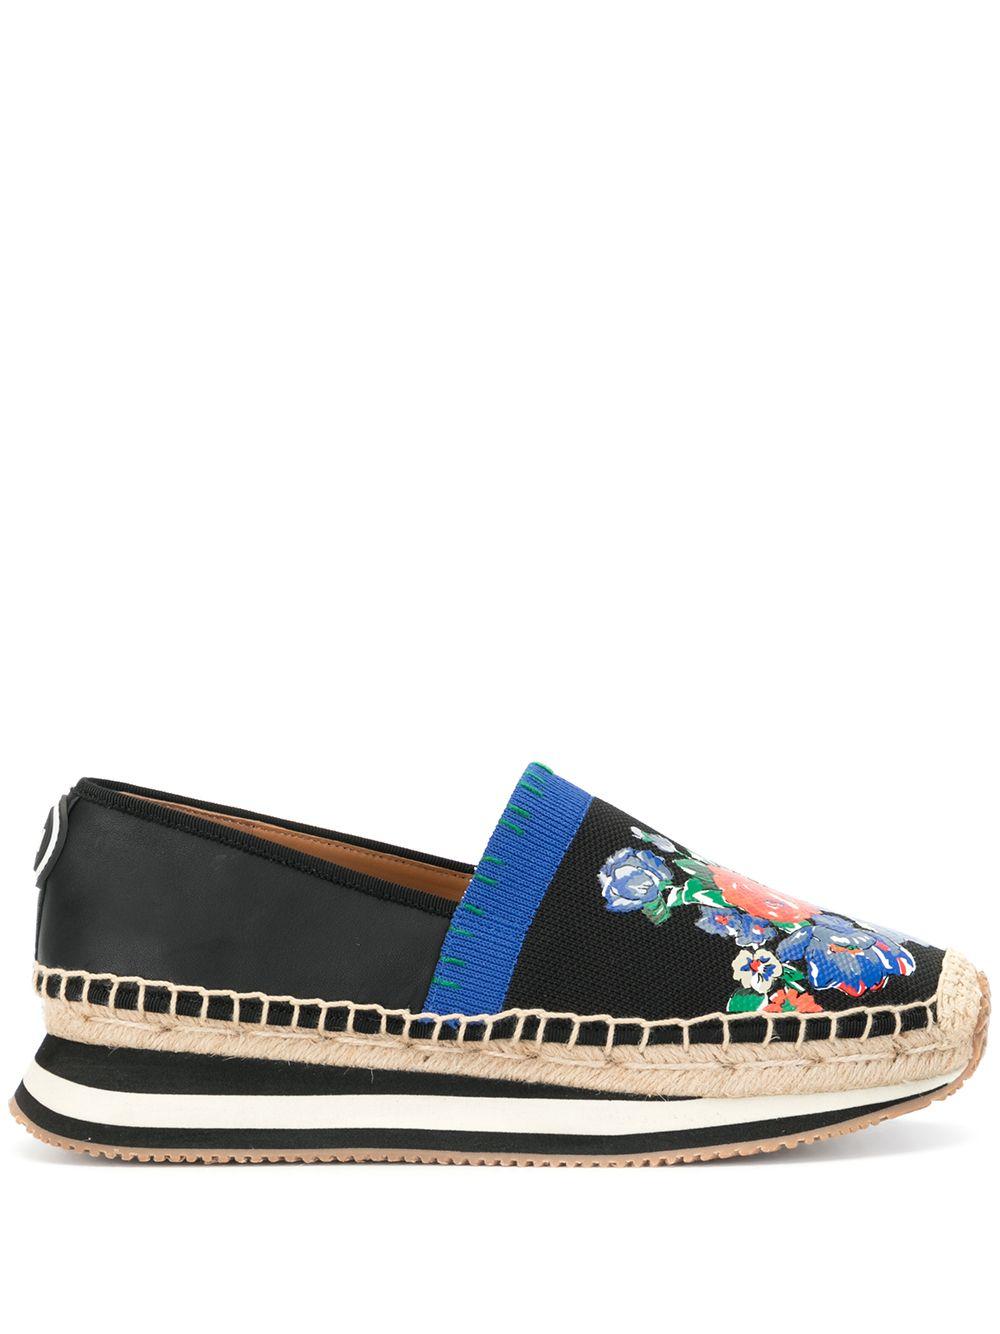 Tory Burch Daisy Floral Espadrilles in Blue | Lyst